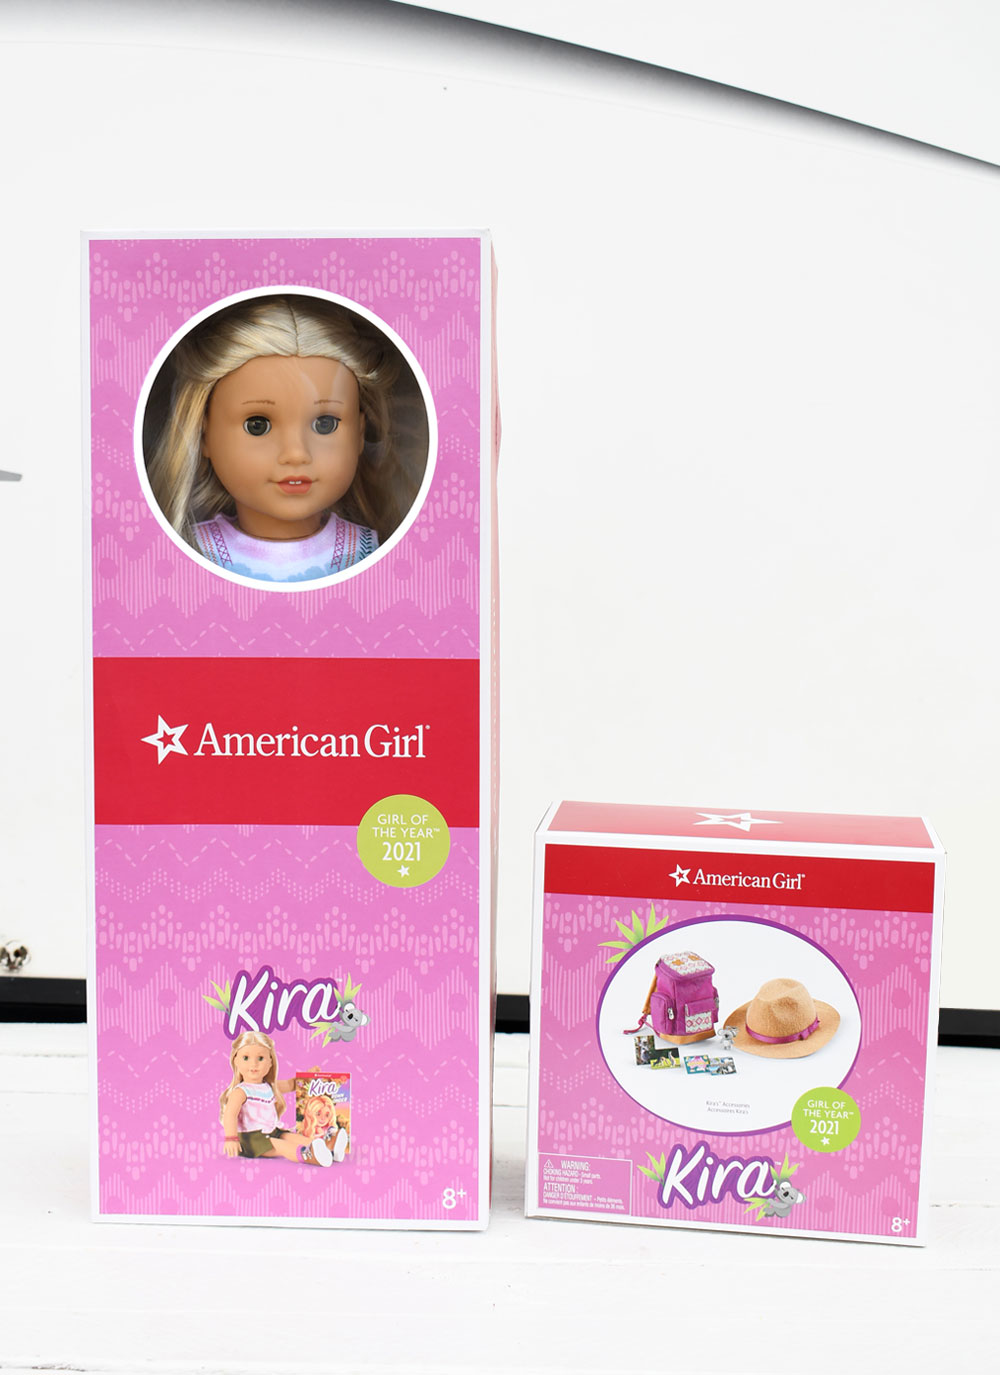 American Girl of the Year 2021 Kira Bailey doll and accessory set